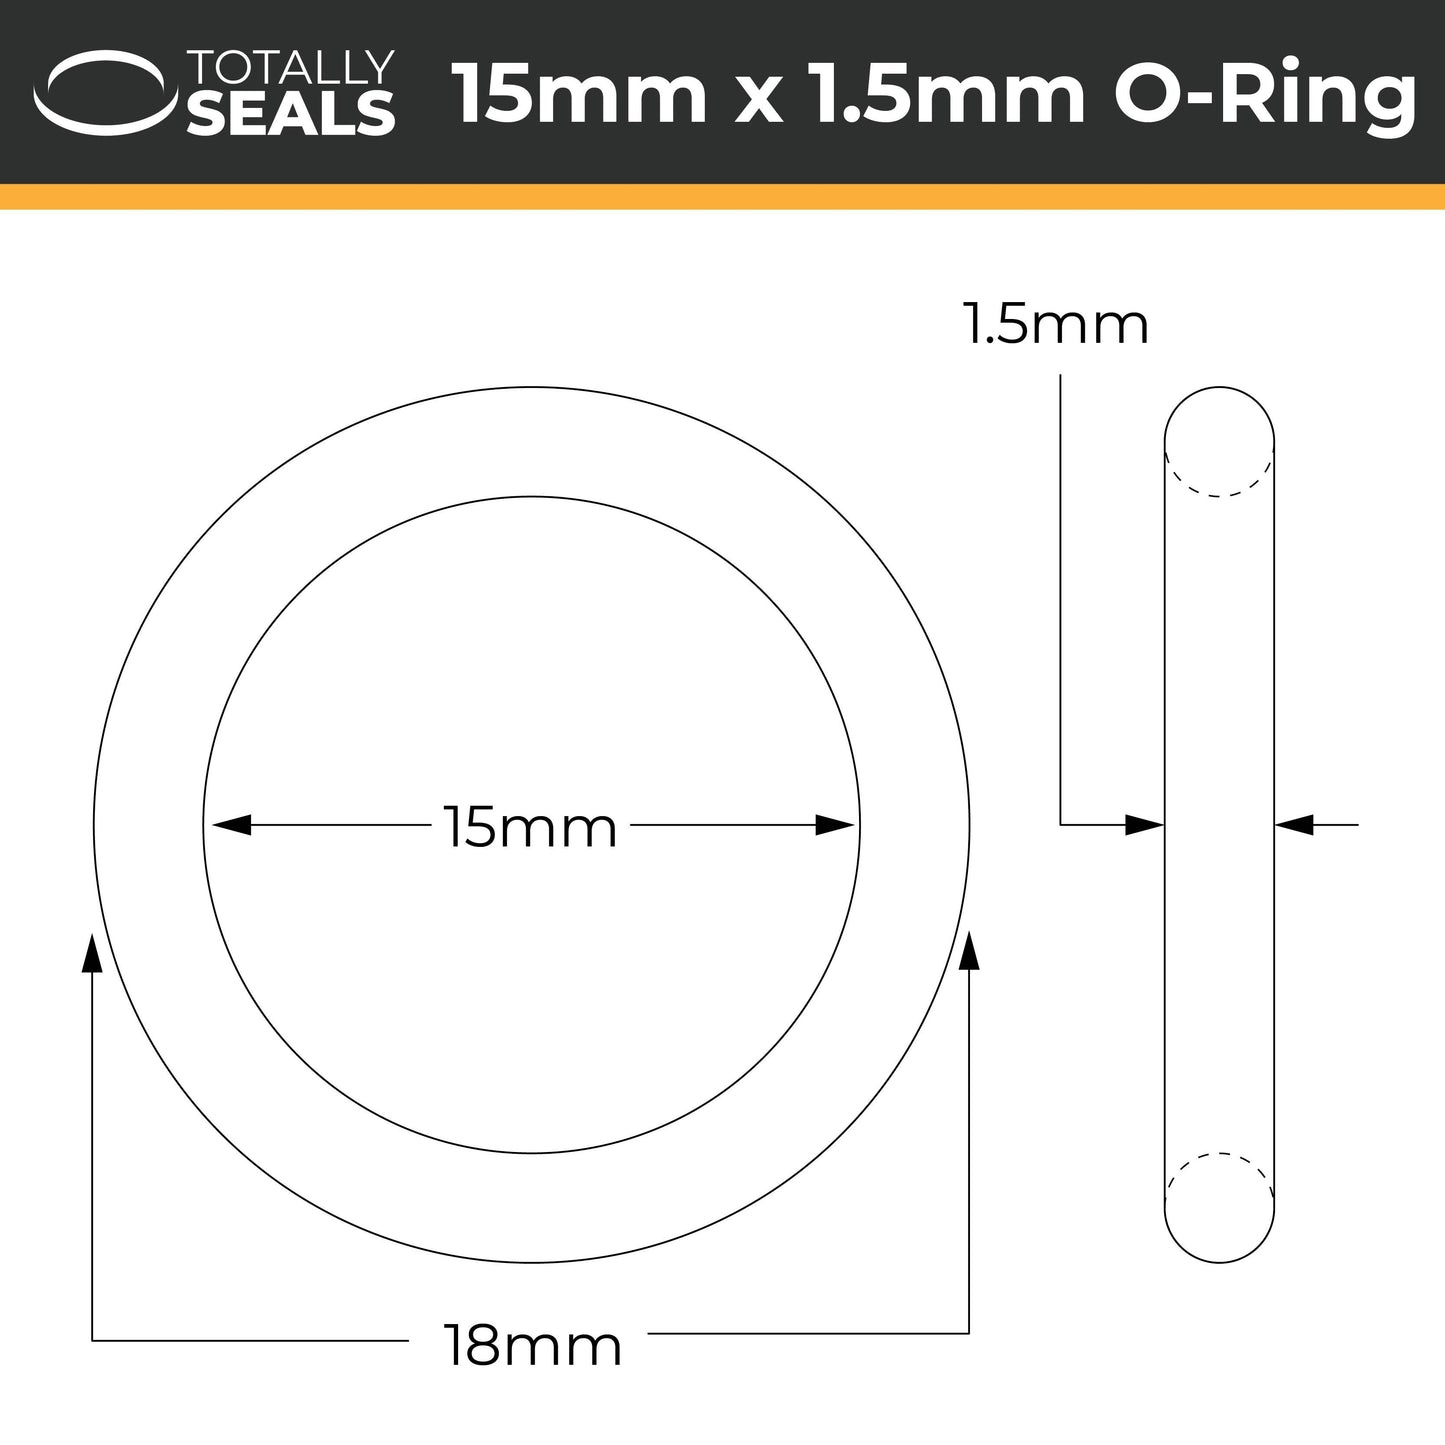 15mm x 1.5mm (18mm OD) Nitrile O-Rings - Totally Seals®